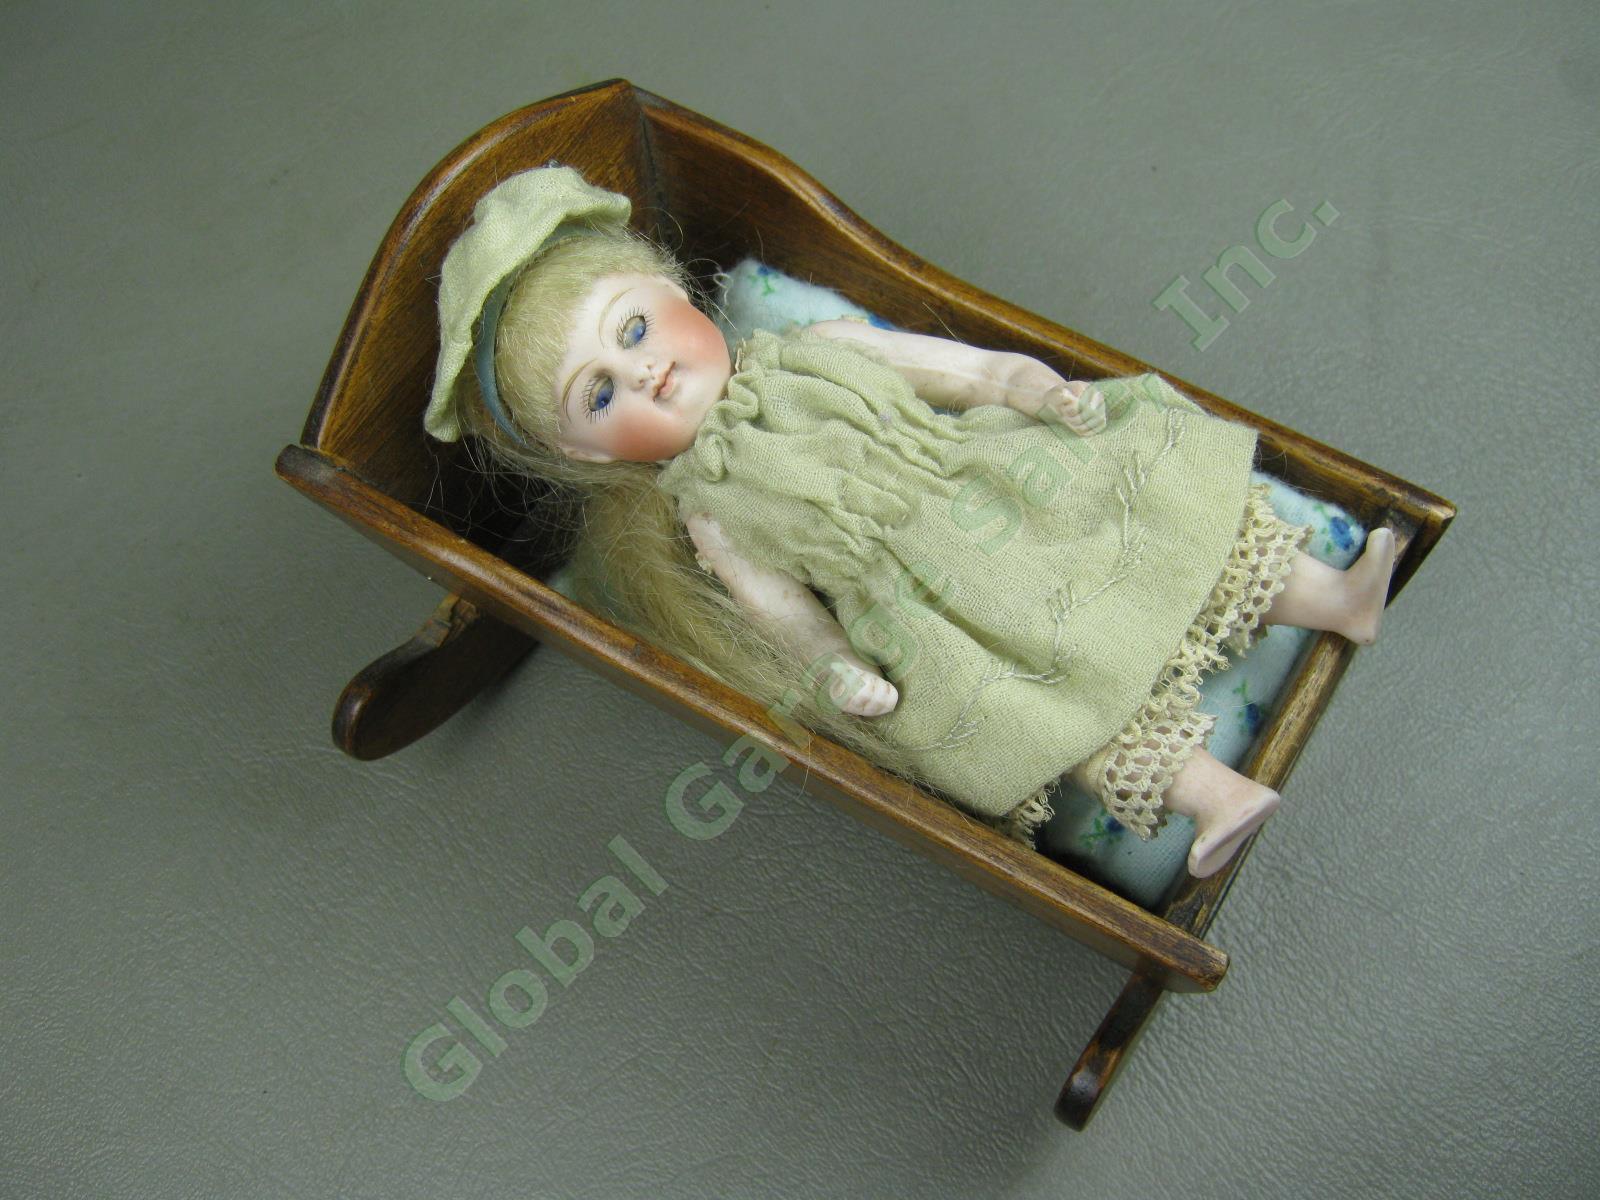 Vtg Antique 1880s-1890s French Bisque Girl Child Doll W/ Sleep Eyes Wood Cradle 1